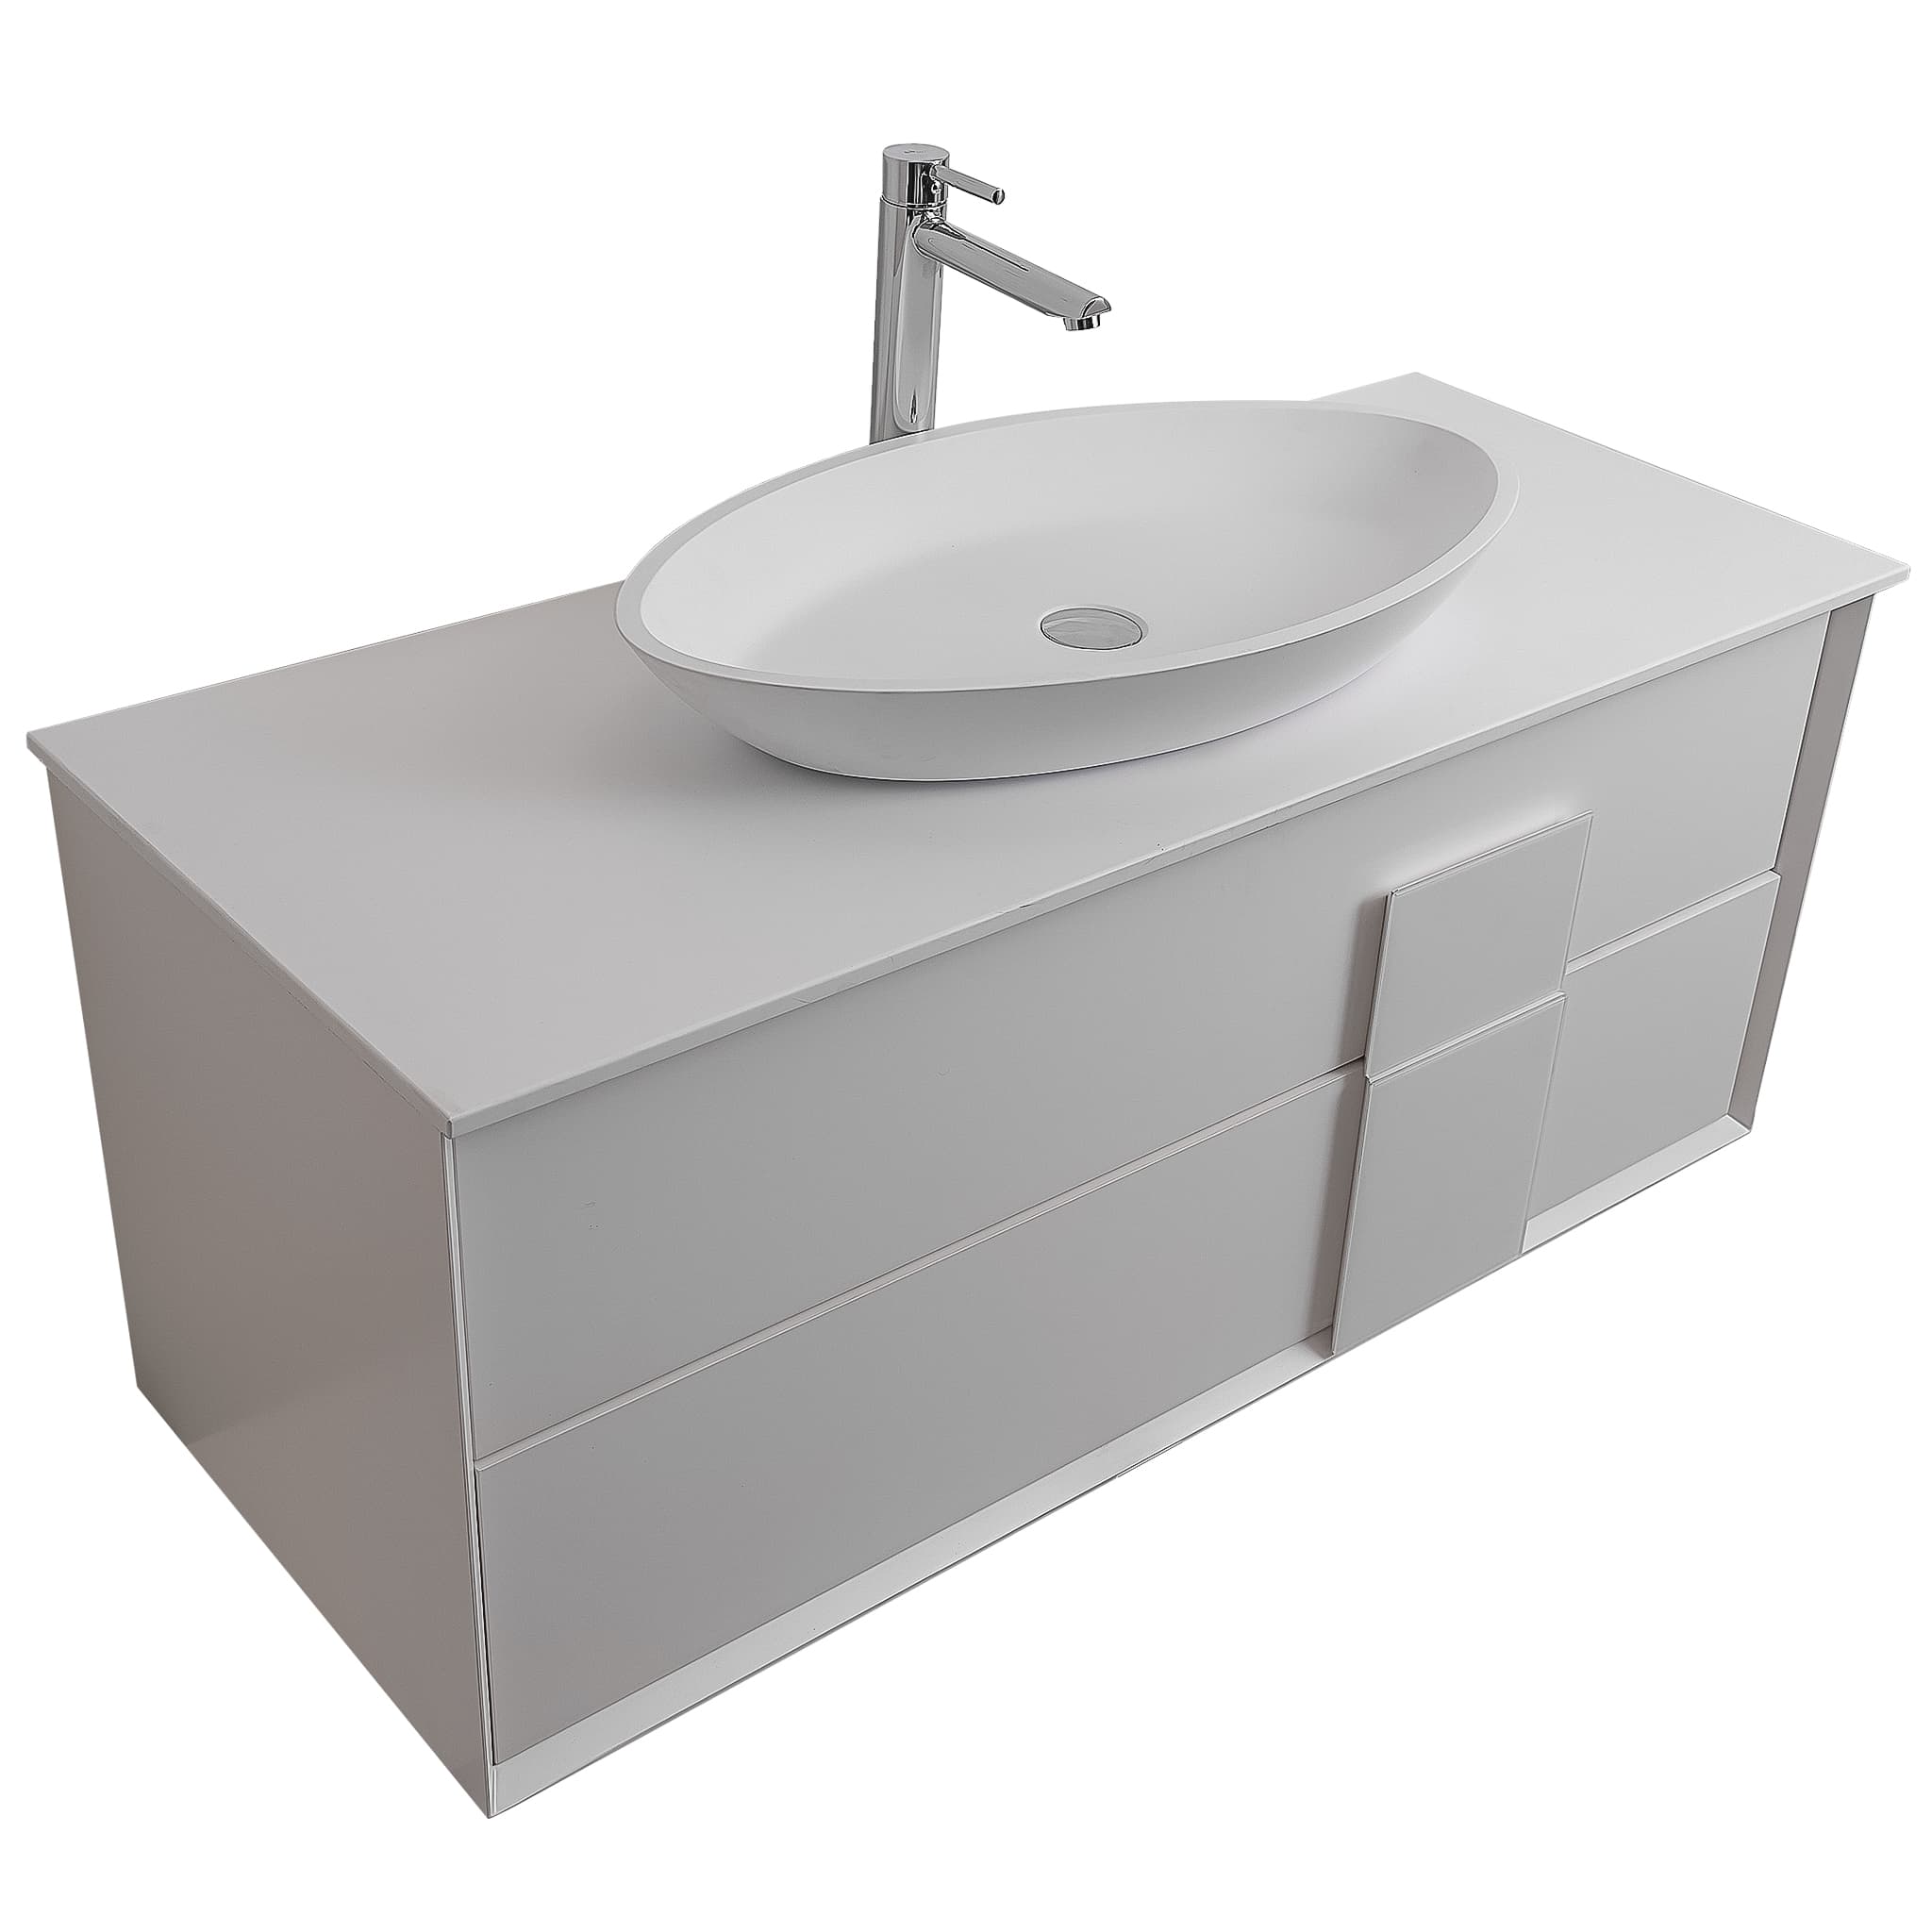 Piazza 47.5 Matte White With White Handle Cabinet, Solid Surface Flat White Counter and Oval Solid Surface White Basin 1305, Wall Mounted Modern Vanity Set